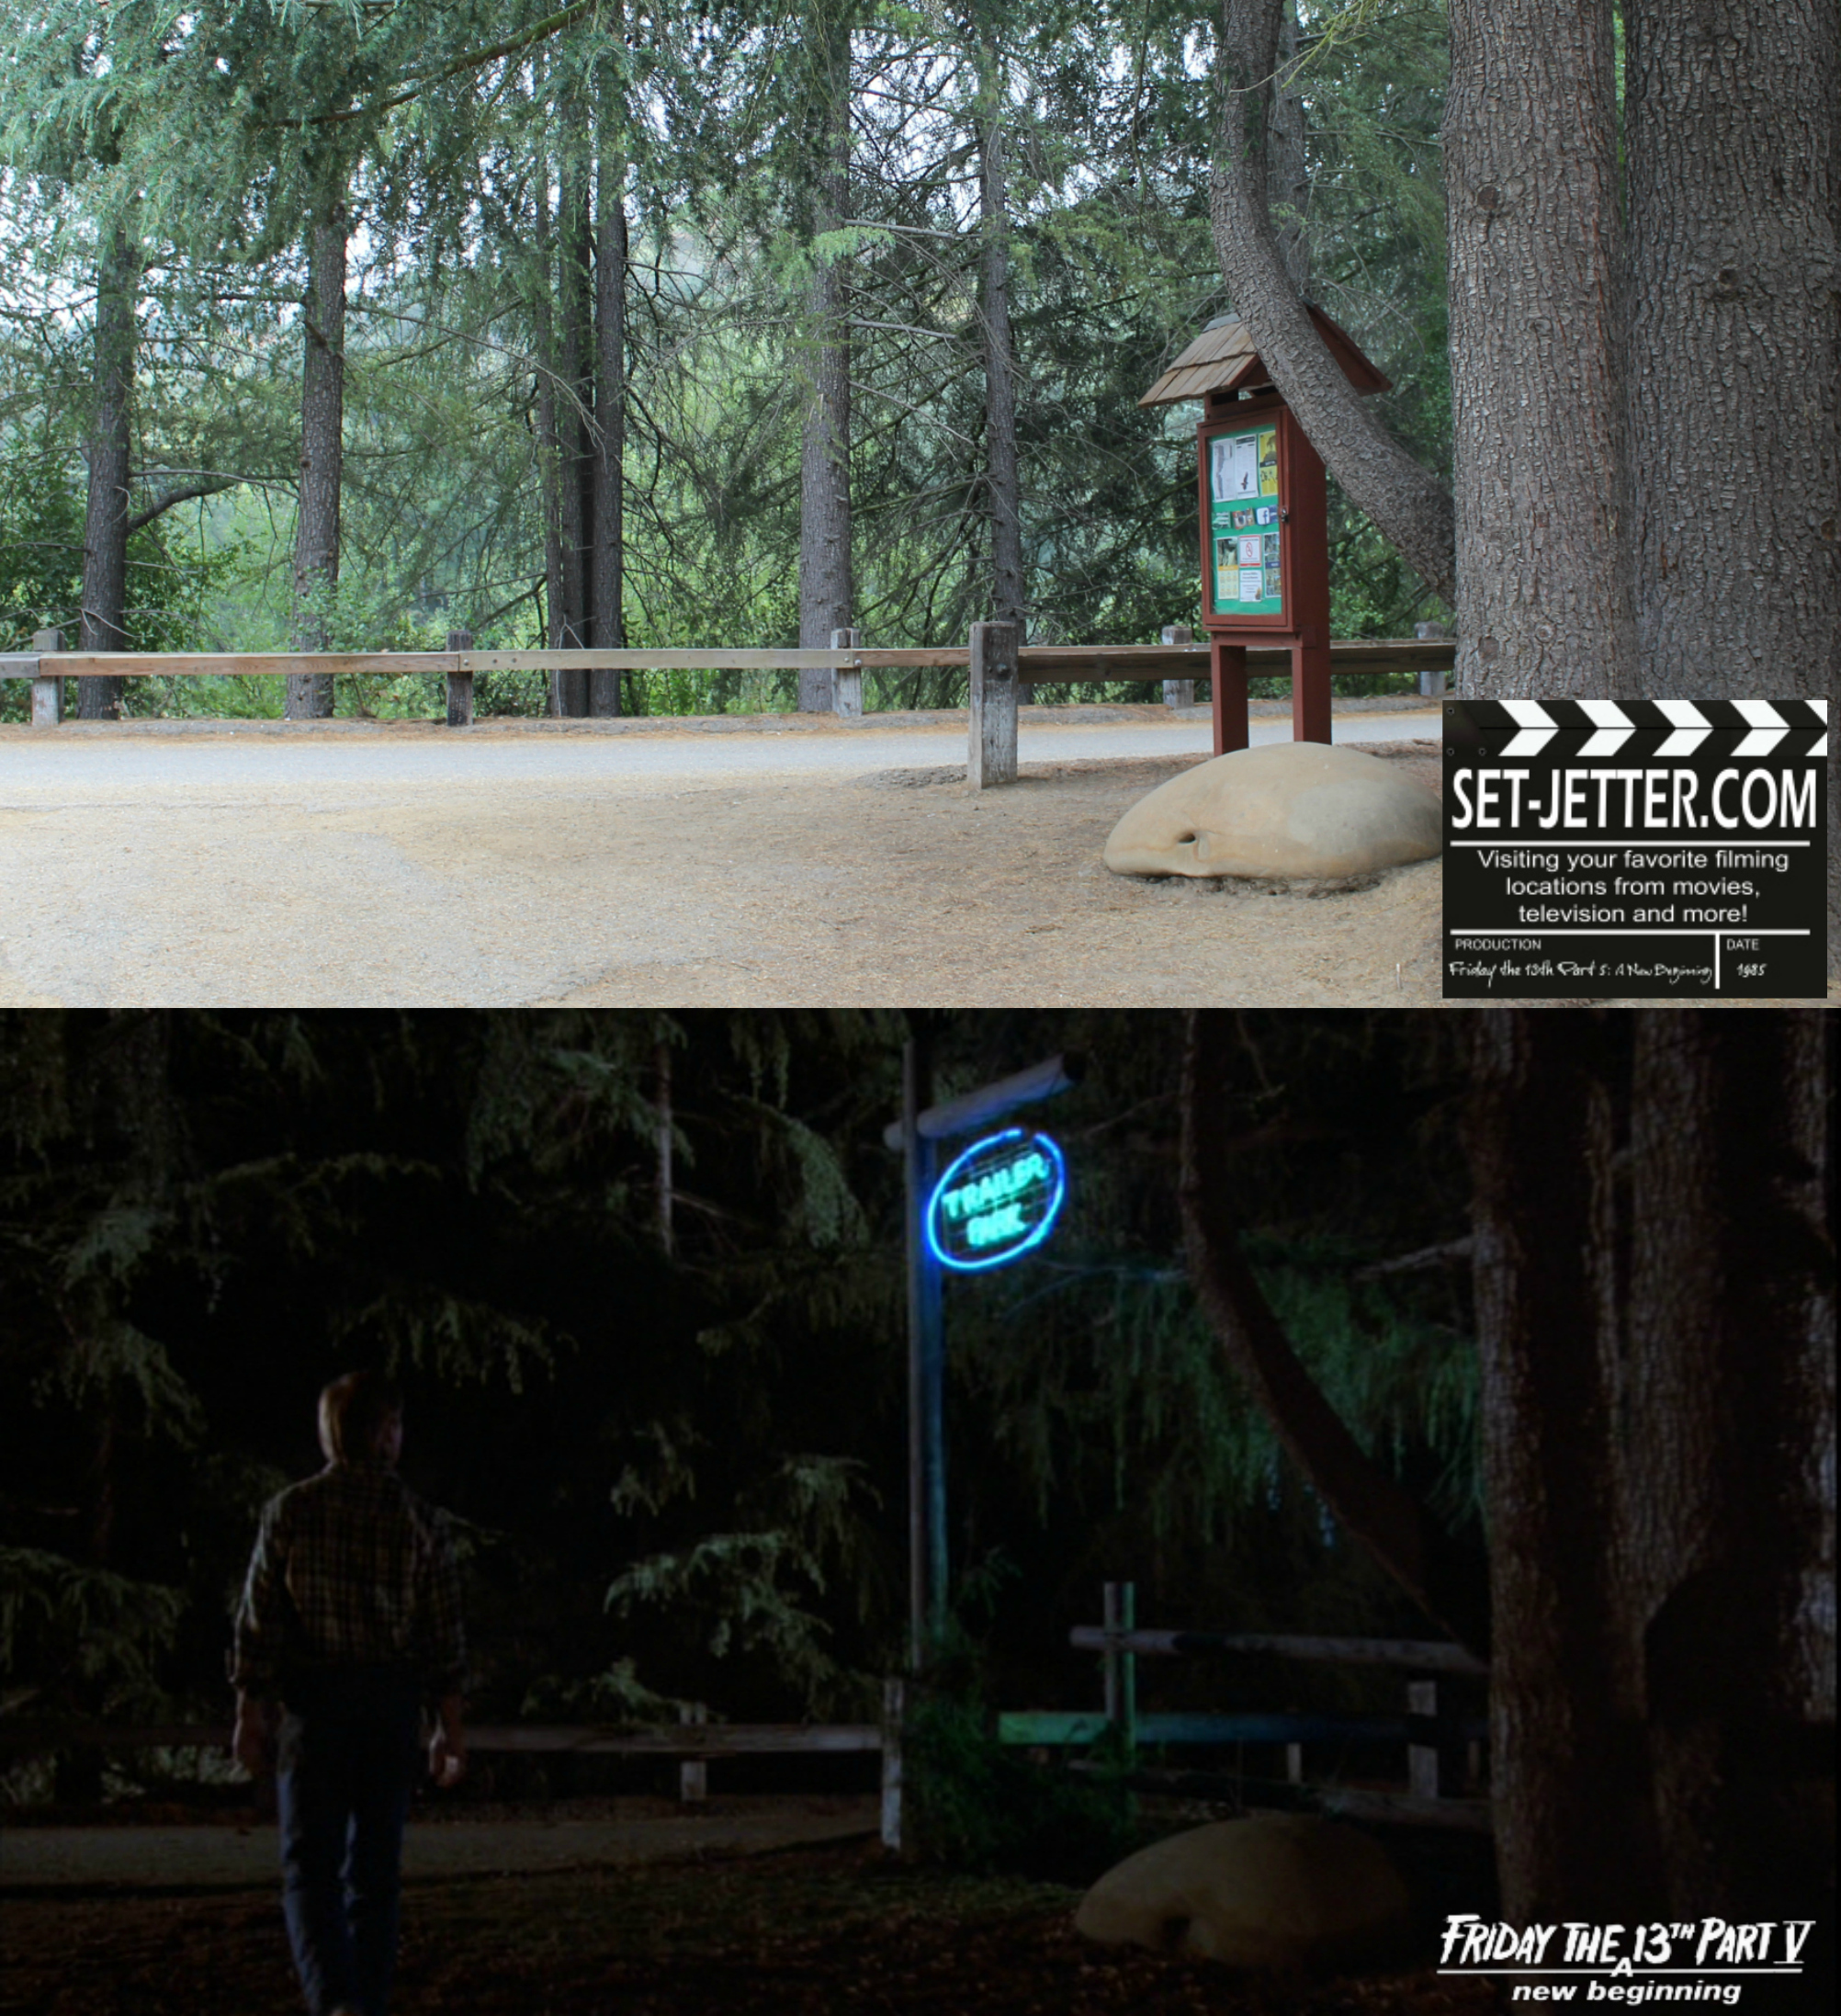 Friday the 13th Part V comparison 39.jpg